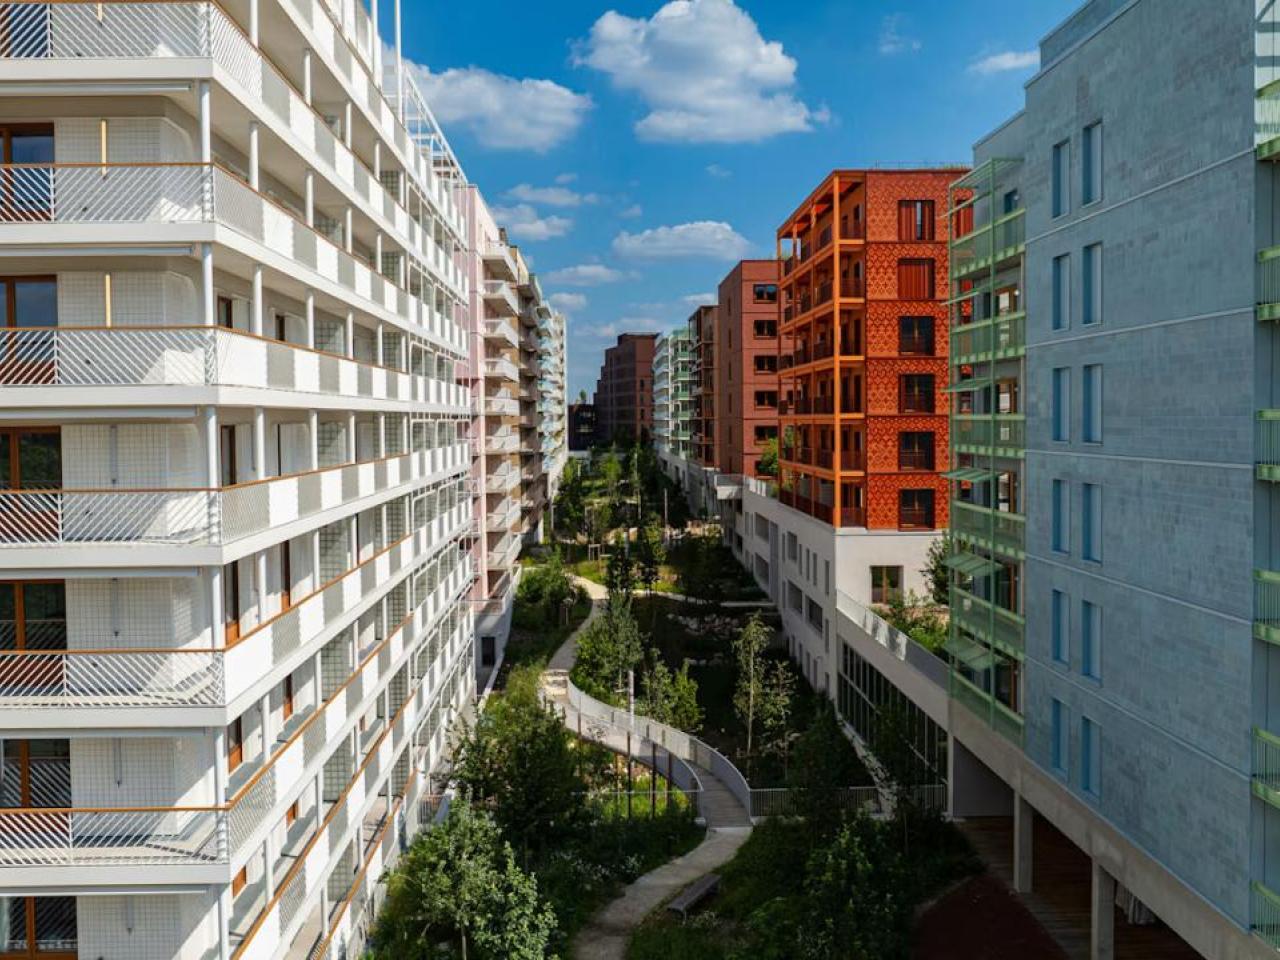 Aerial view of a courtyard between tall residential complexes.